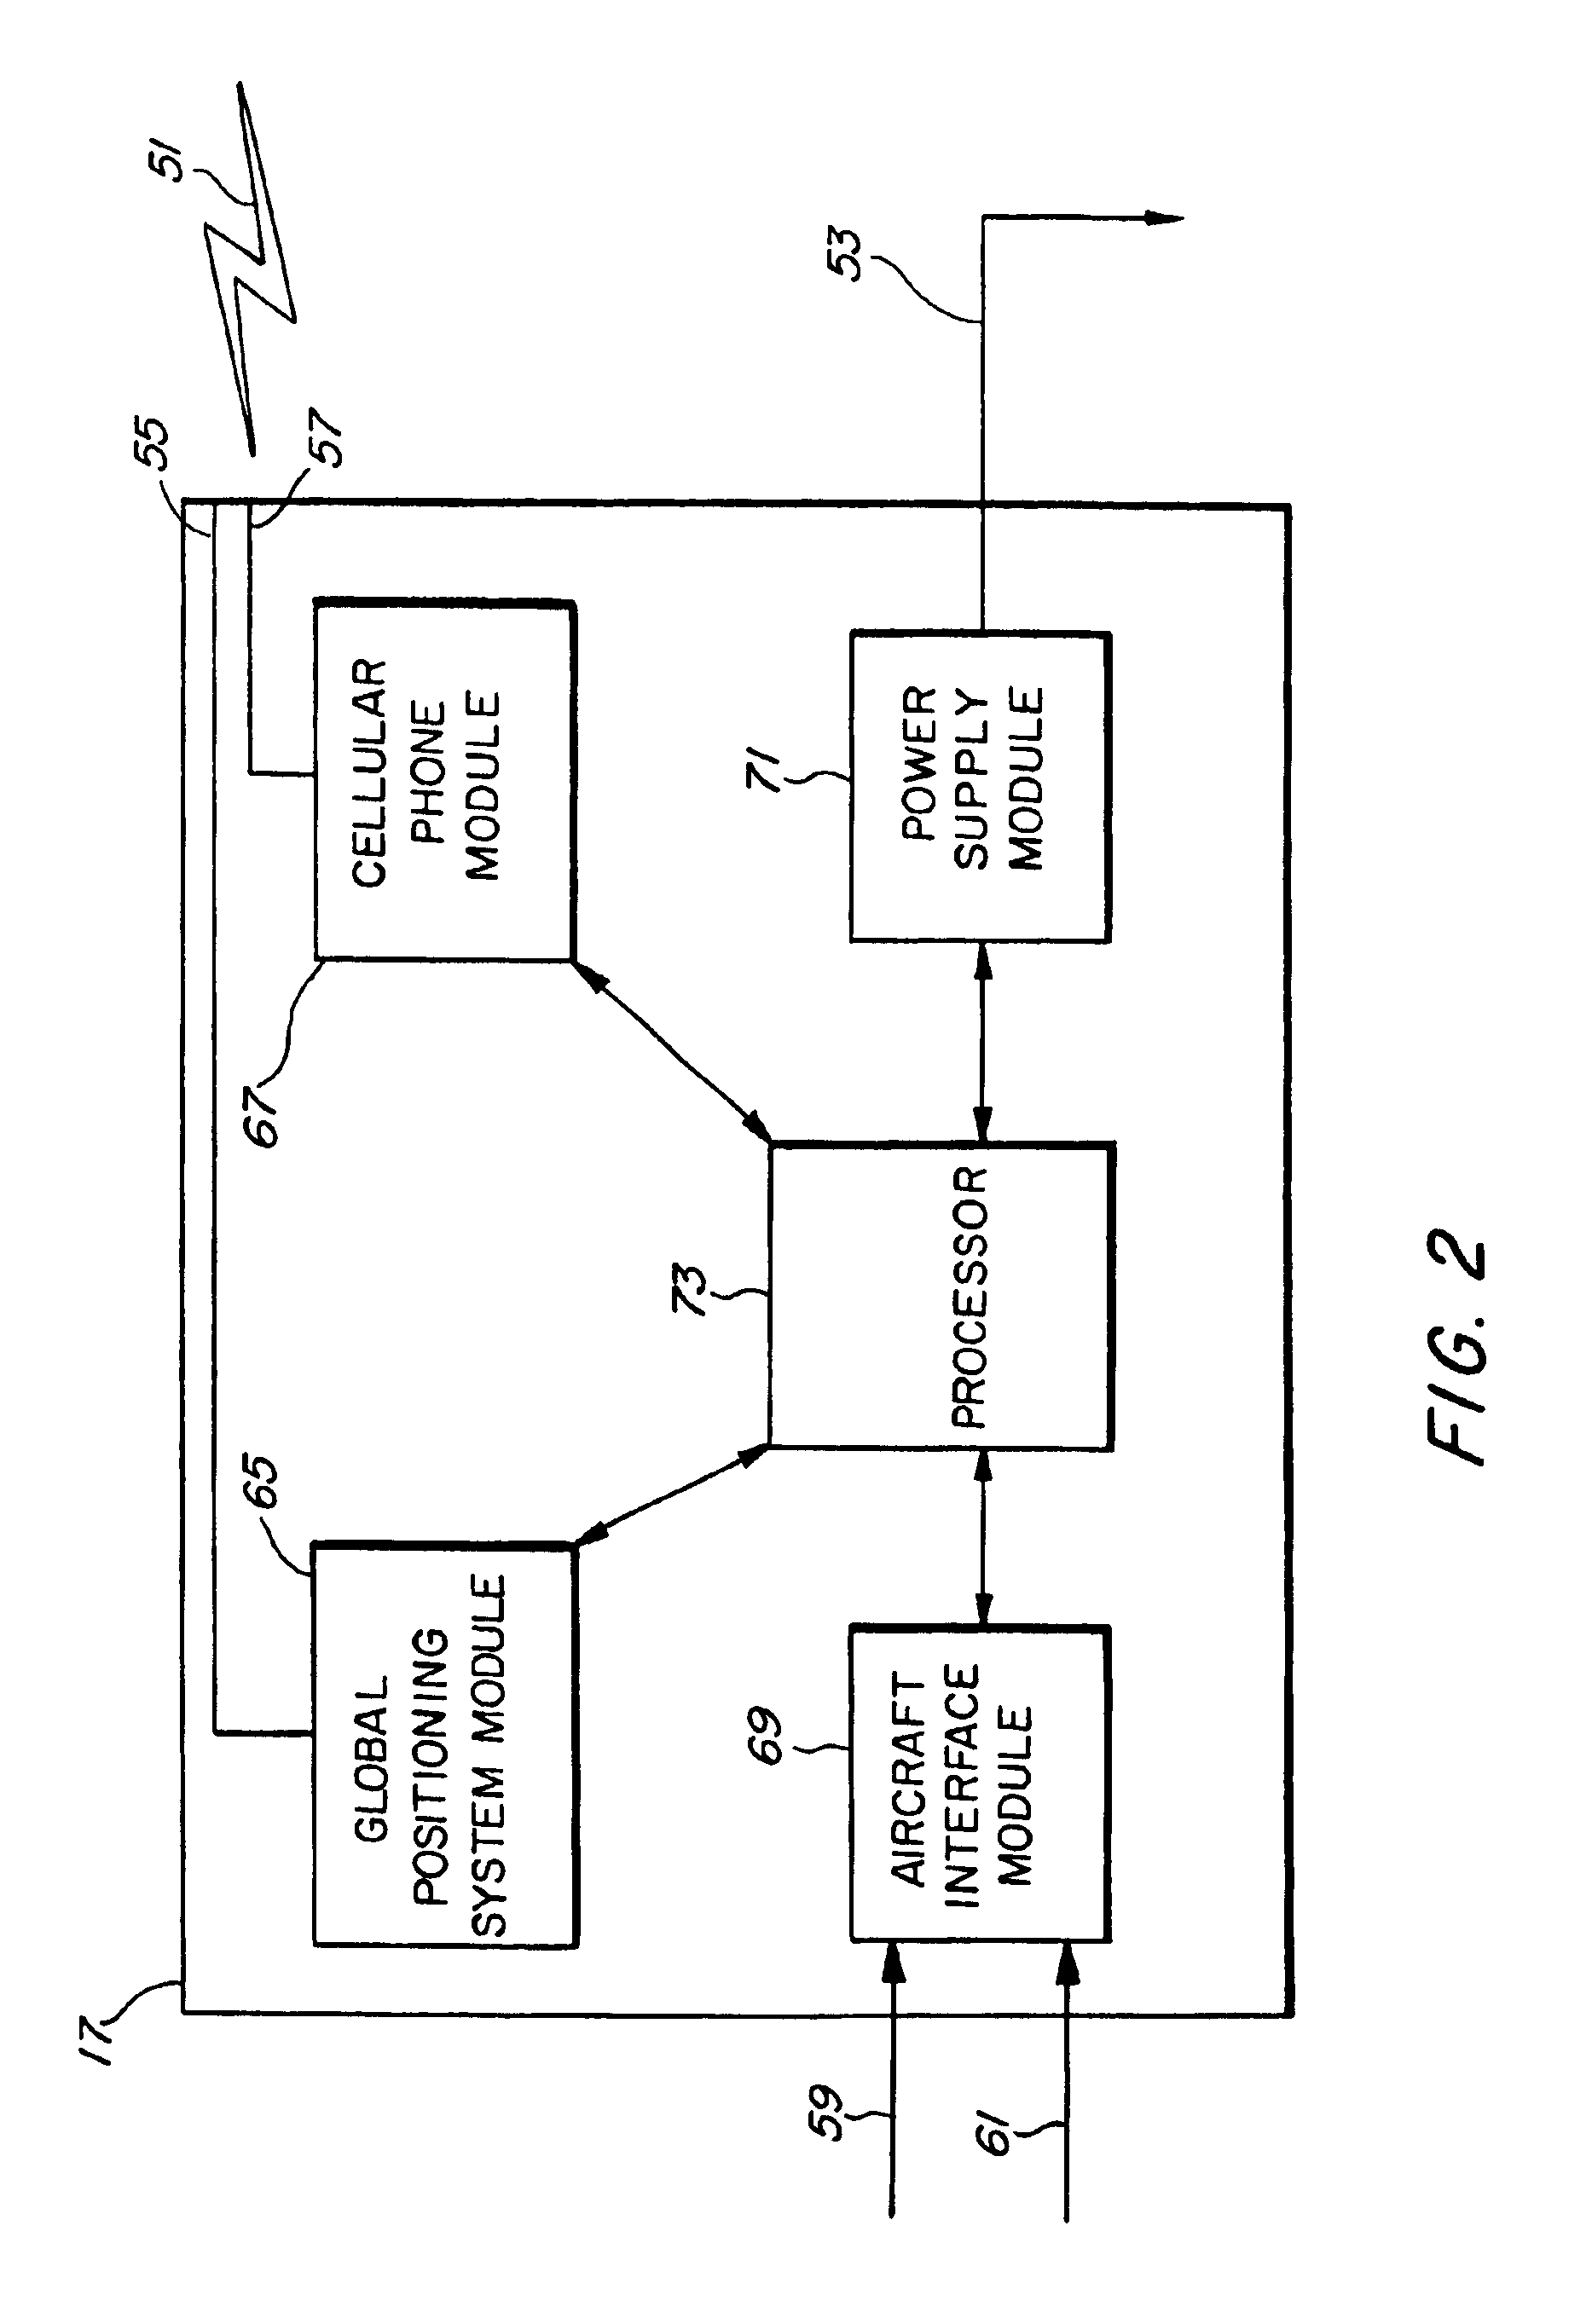 Aircraft data transmission system for wireless communication of data between the aircraft and ground-based systems